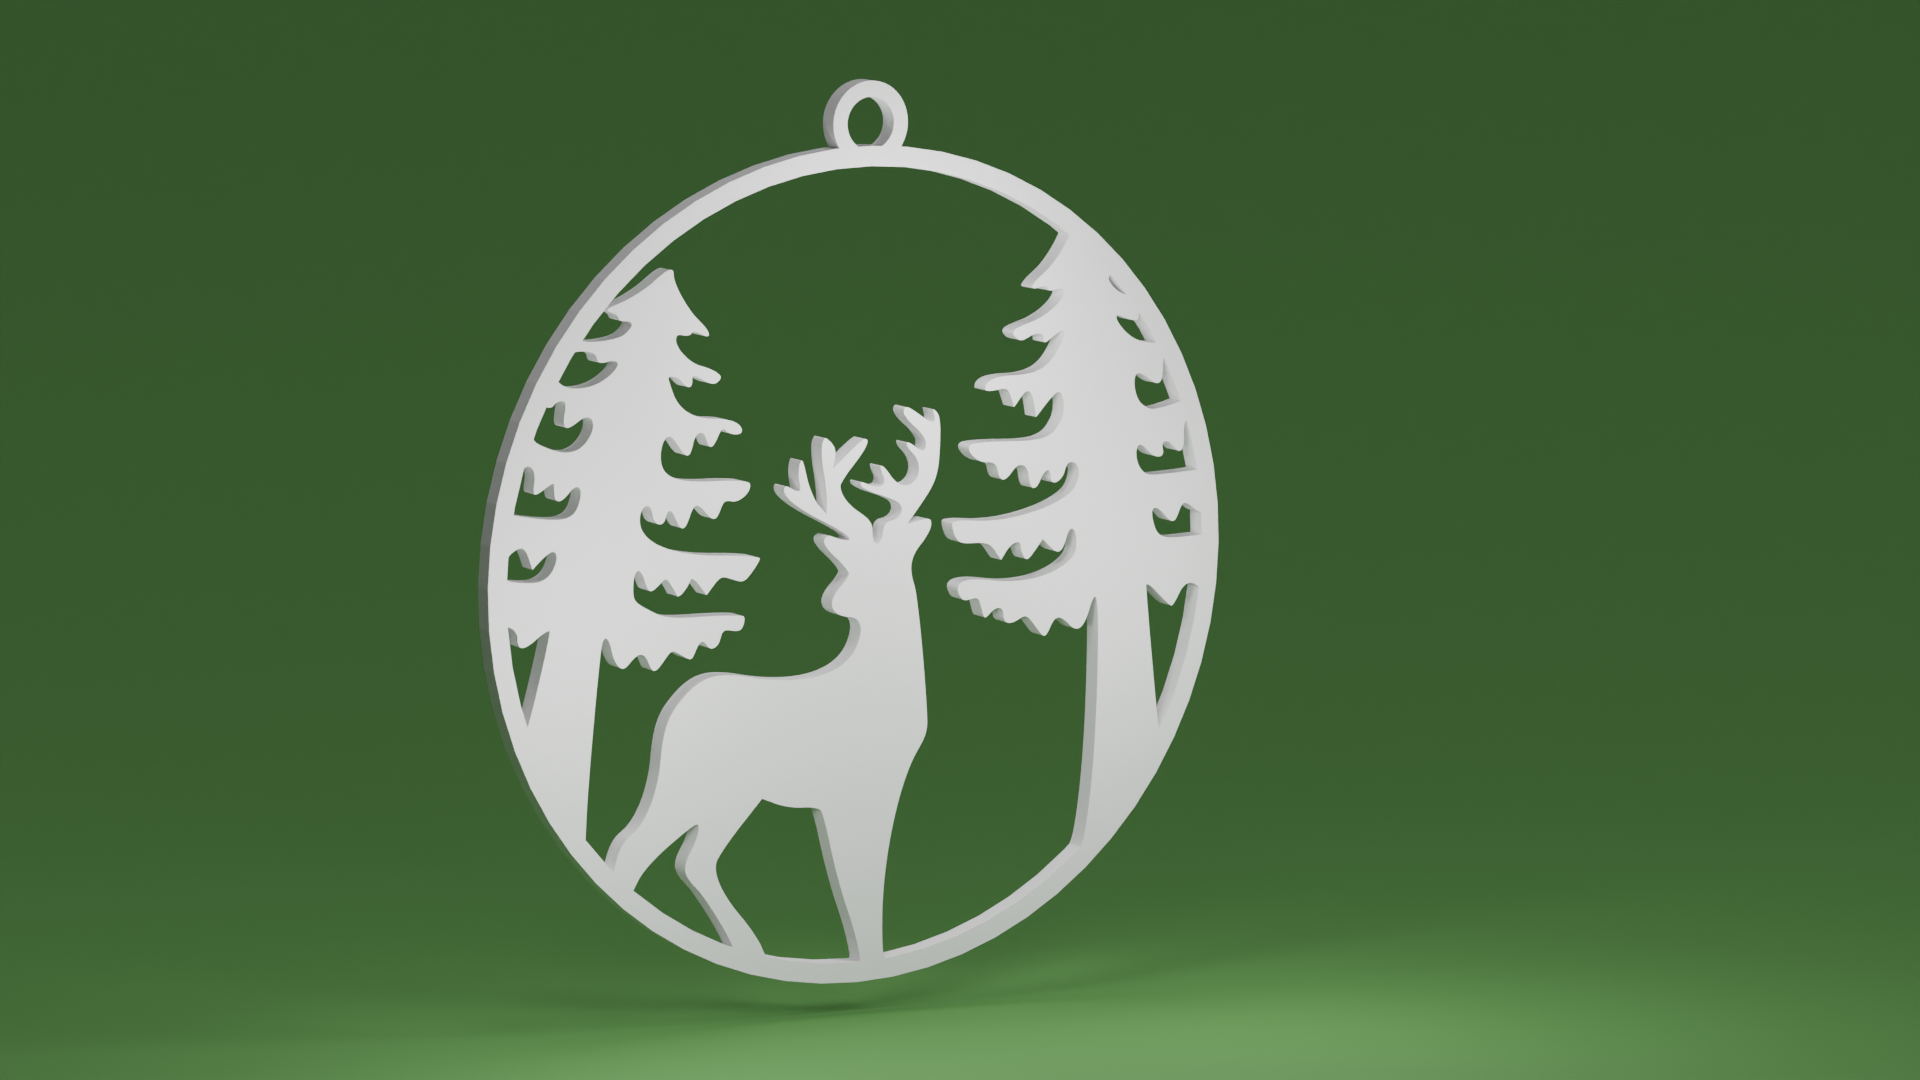 Christmas Tree and Deer inside a bauble (Christmas tree ornament)